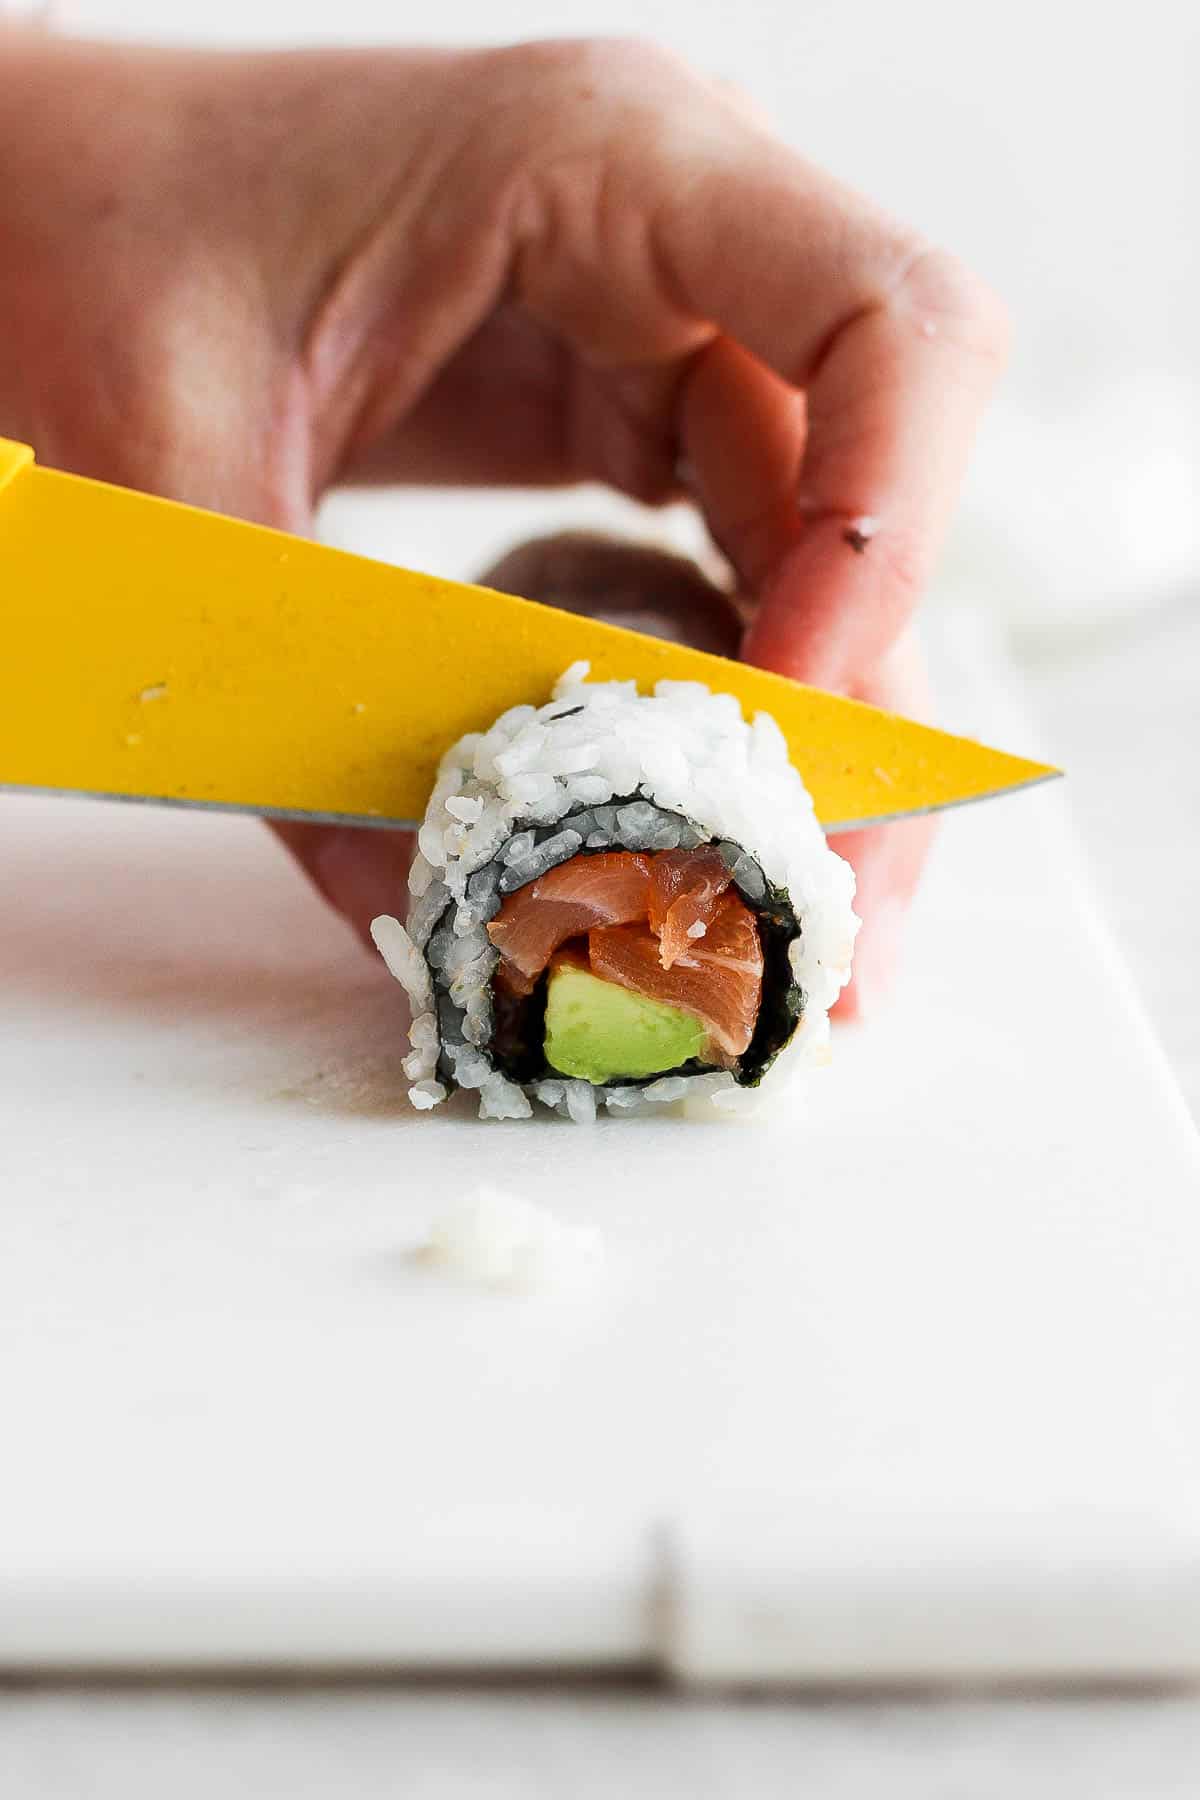 The spicy salmon roll being cut with a sharp knife.